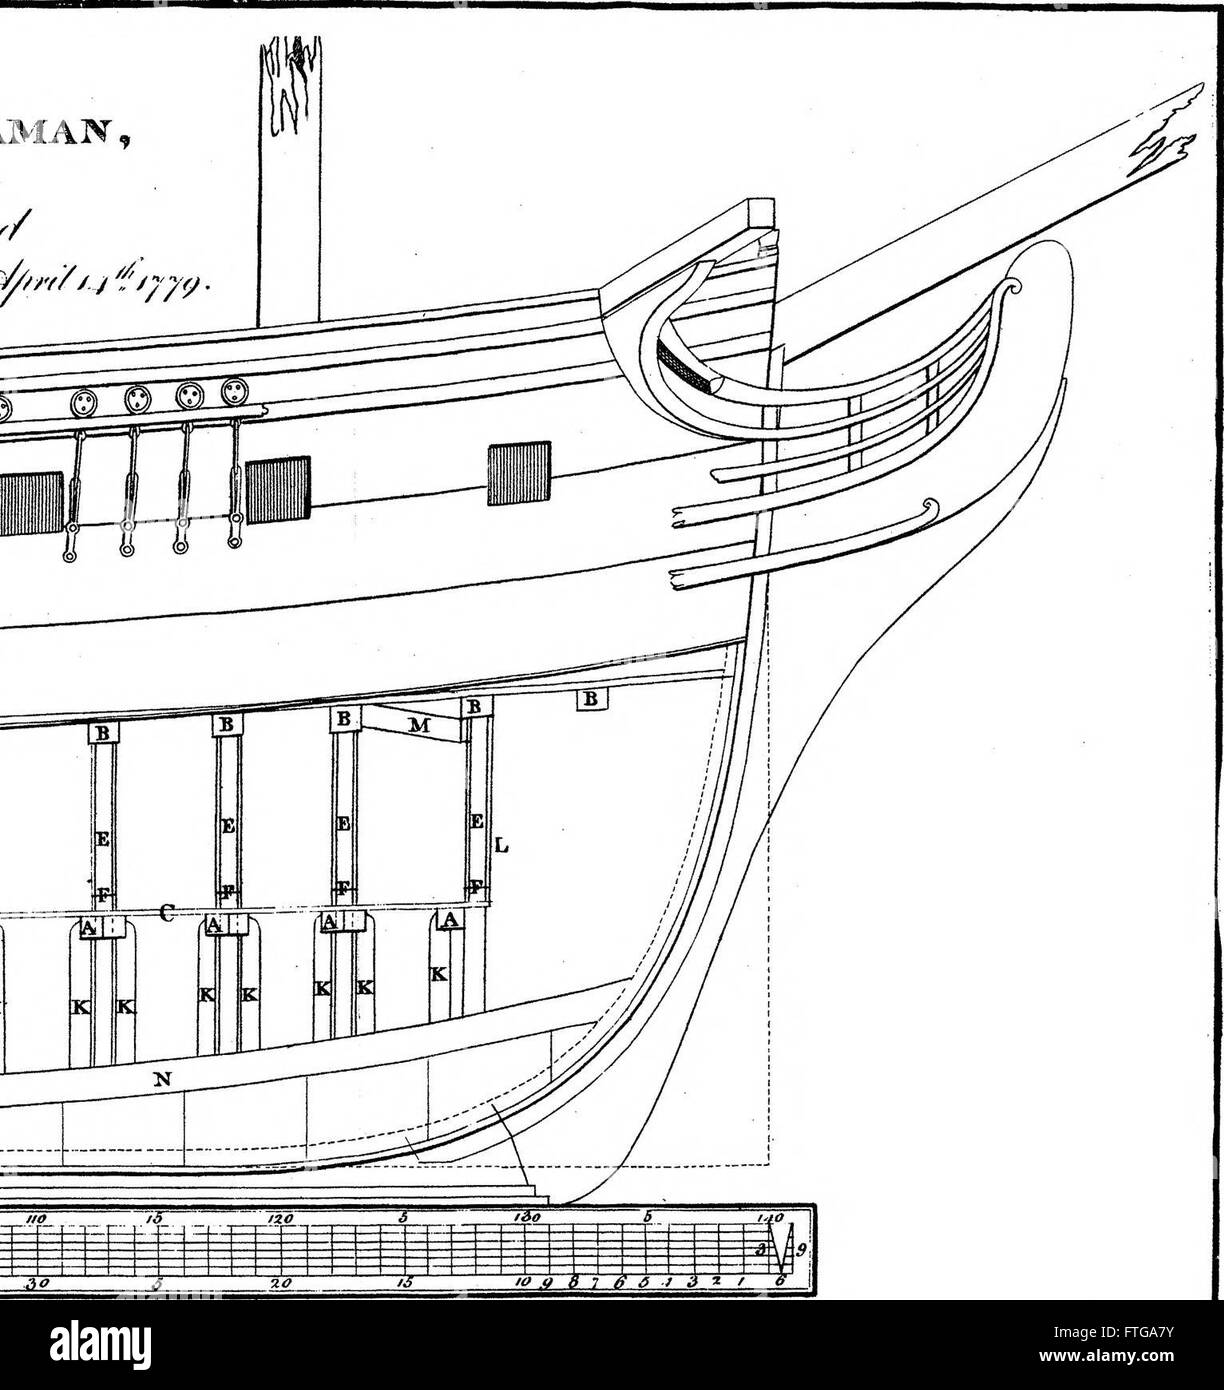 An Account of a Method for the Safe Removal of Ships That Have Been Driven on Shore, and Damaged in Their Bottoms, to Places (However Distant) for Repairing Them. By Mr. William Barnard, Shipbuilder, Stock Photo